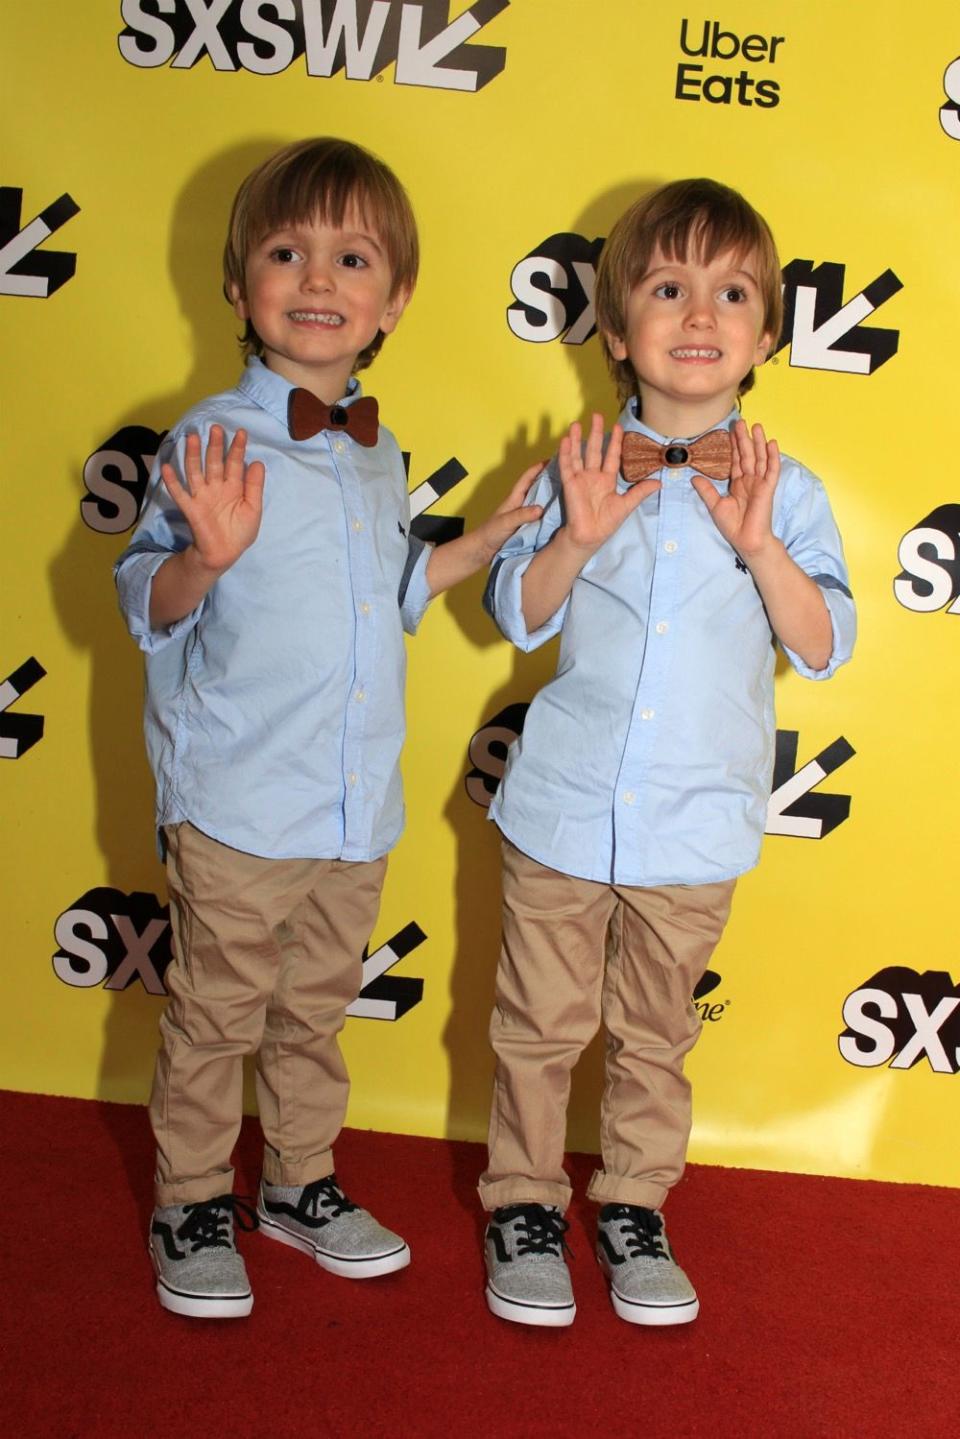 Hugo and Lucas Lavoie at Pet Sematary SXSW World Premiere, photo by Heather Kaplan